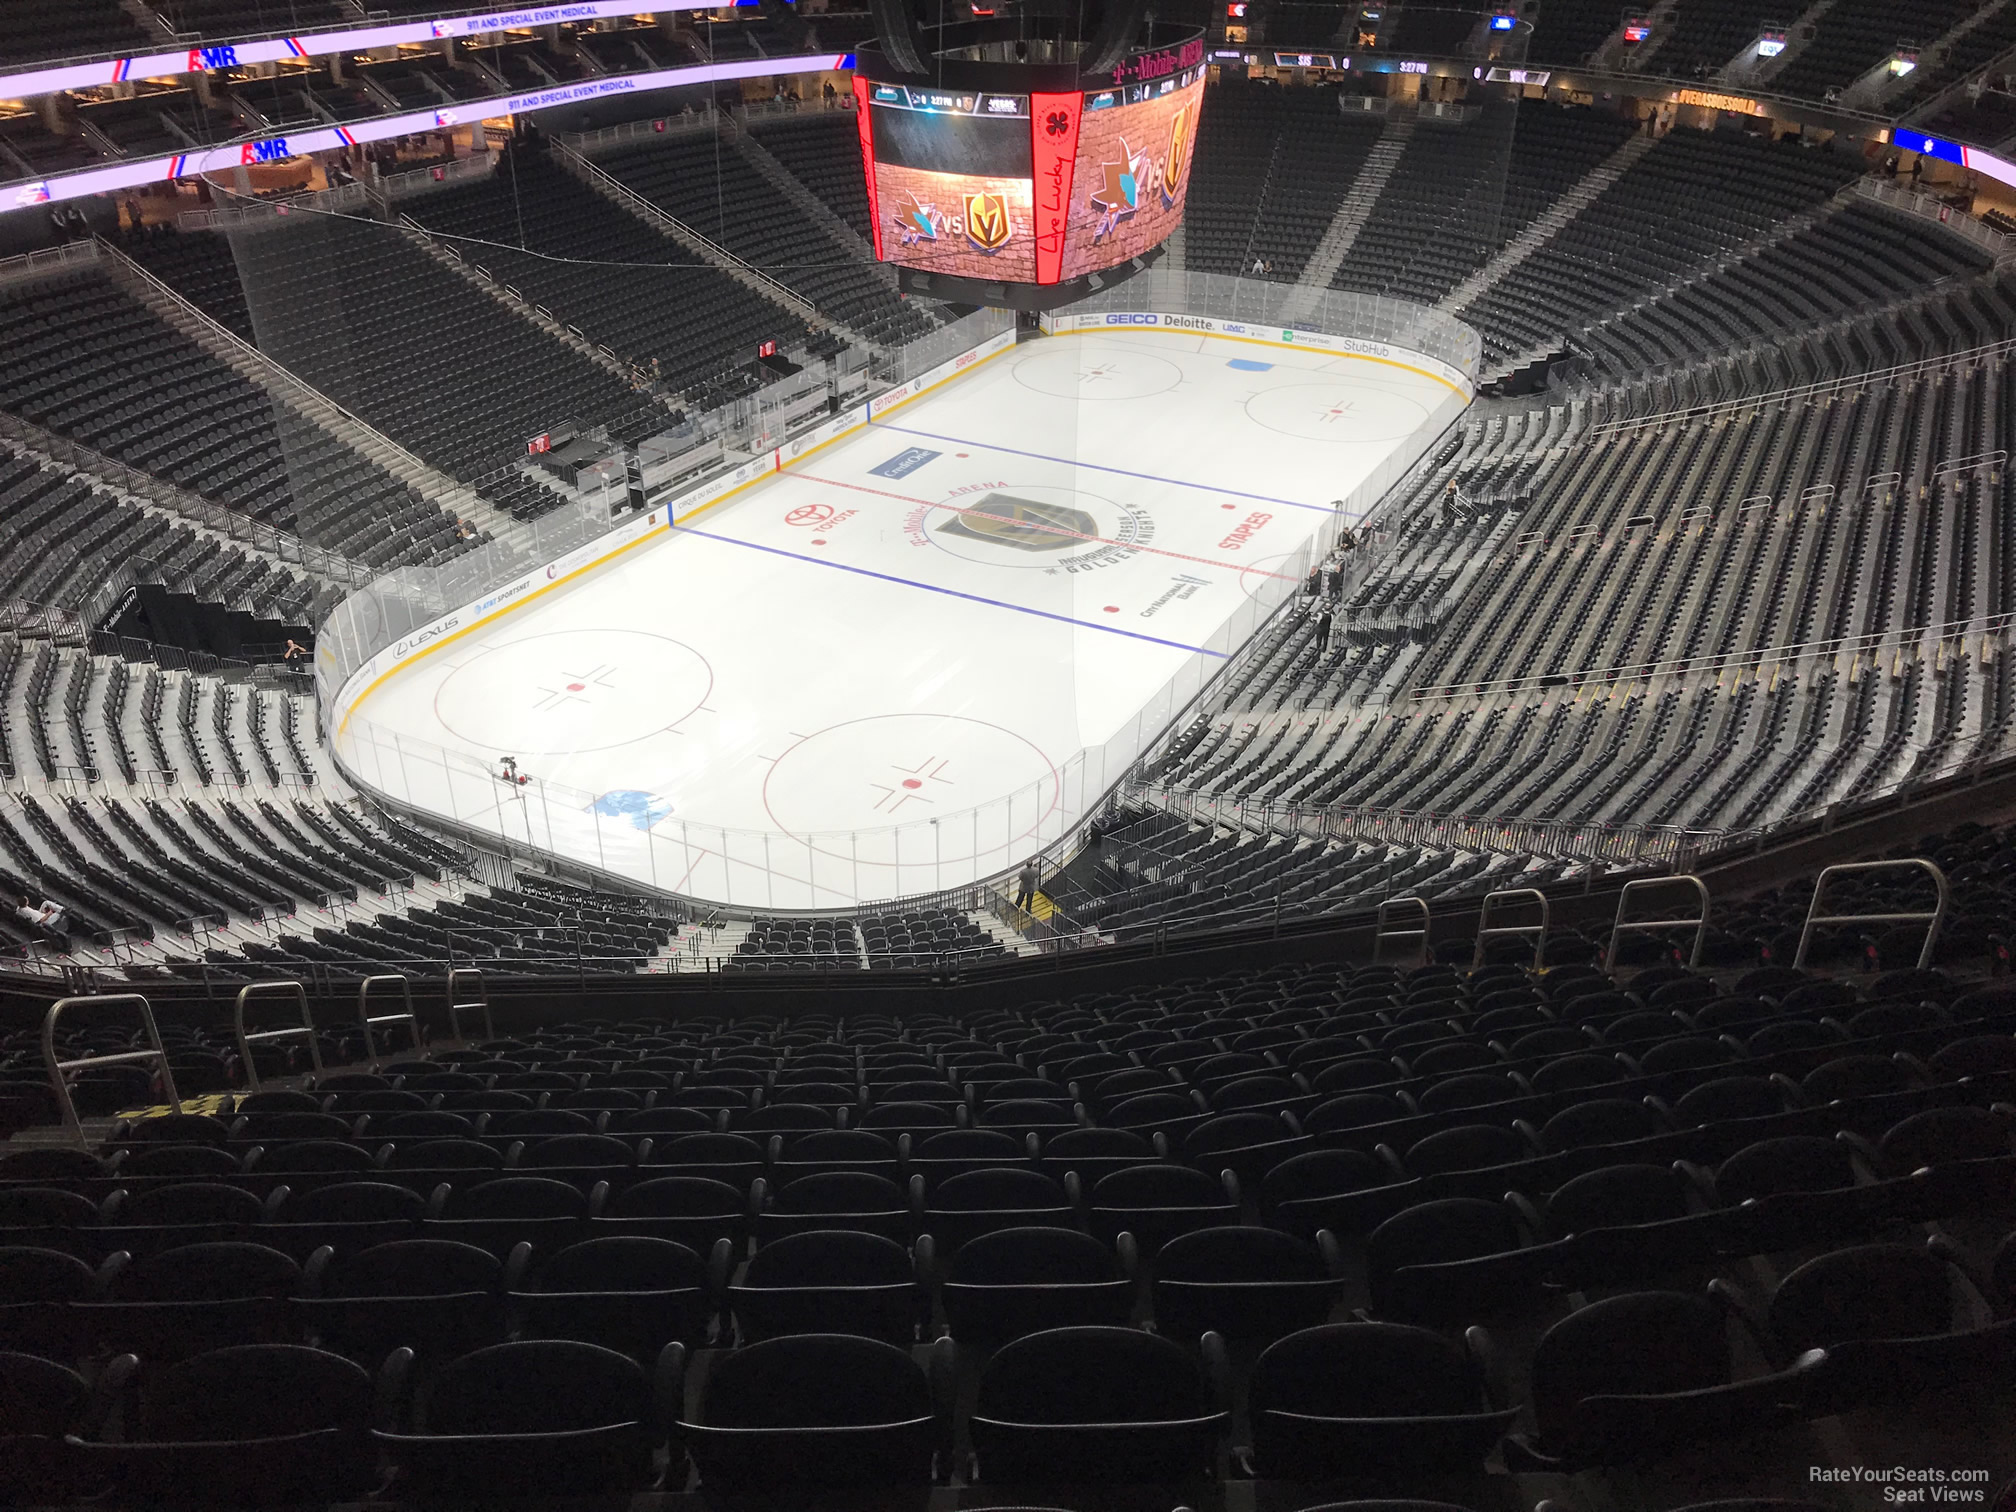 T Mobile Arena Seating Chart